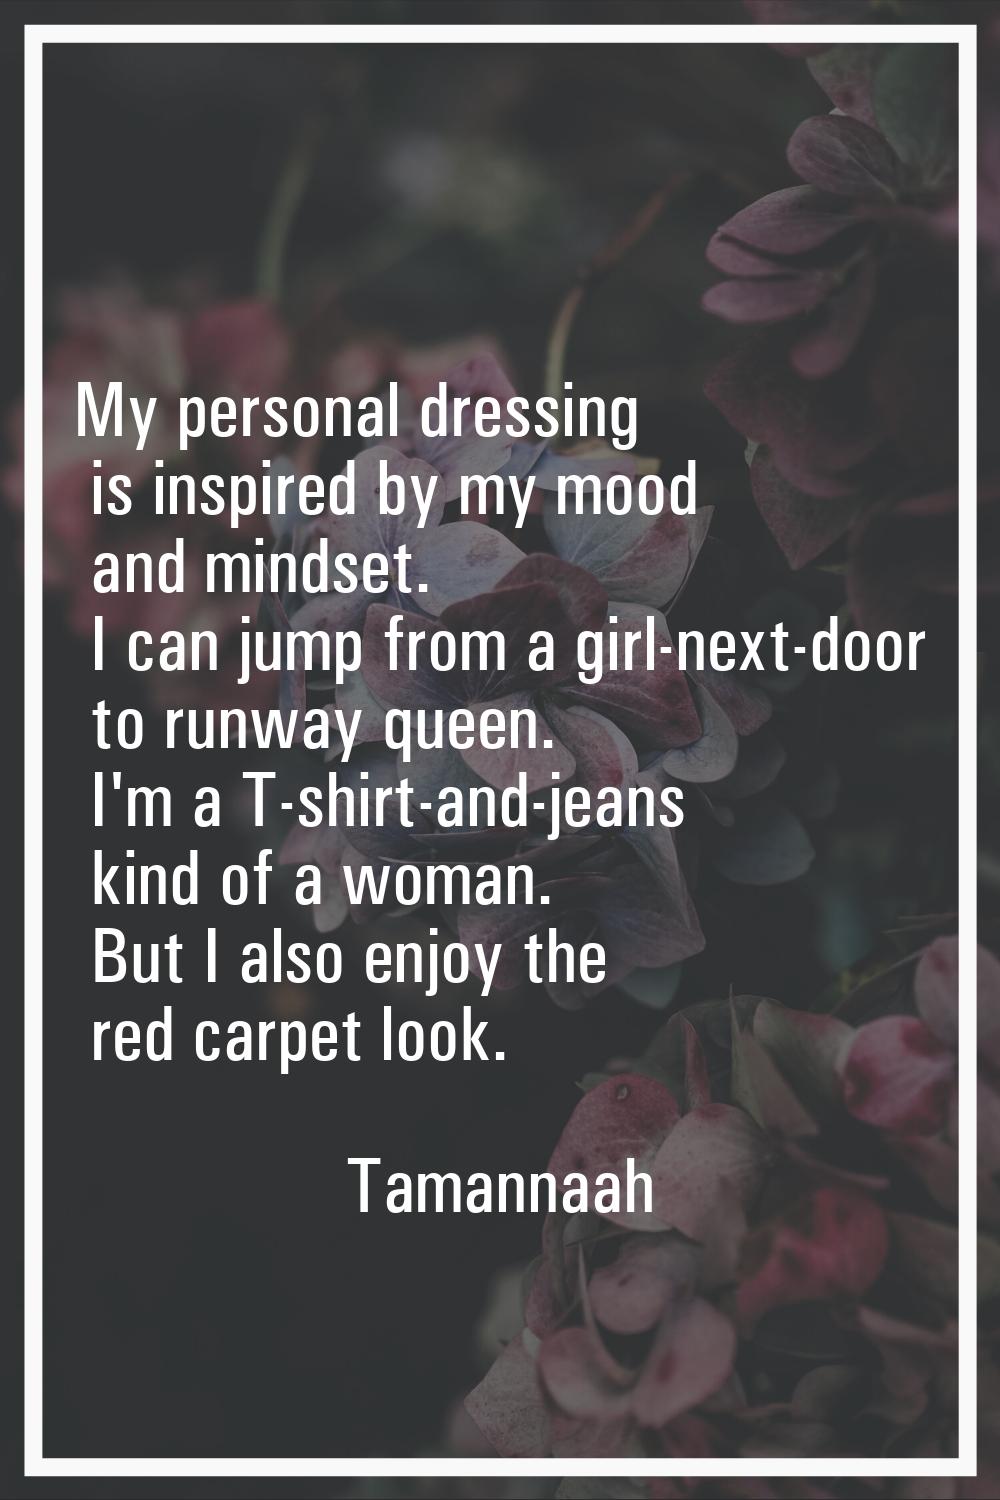 My personal dressing is inspired by my mood and mindset. I can jump from a girl-next-door to runway